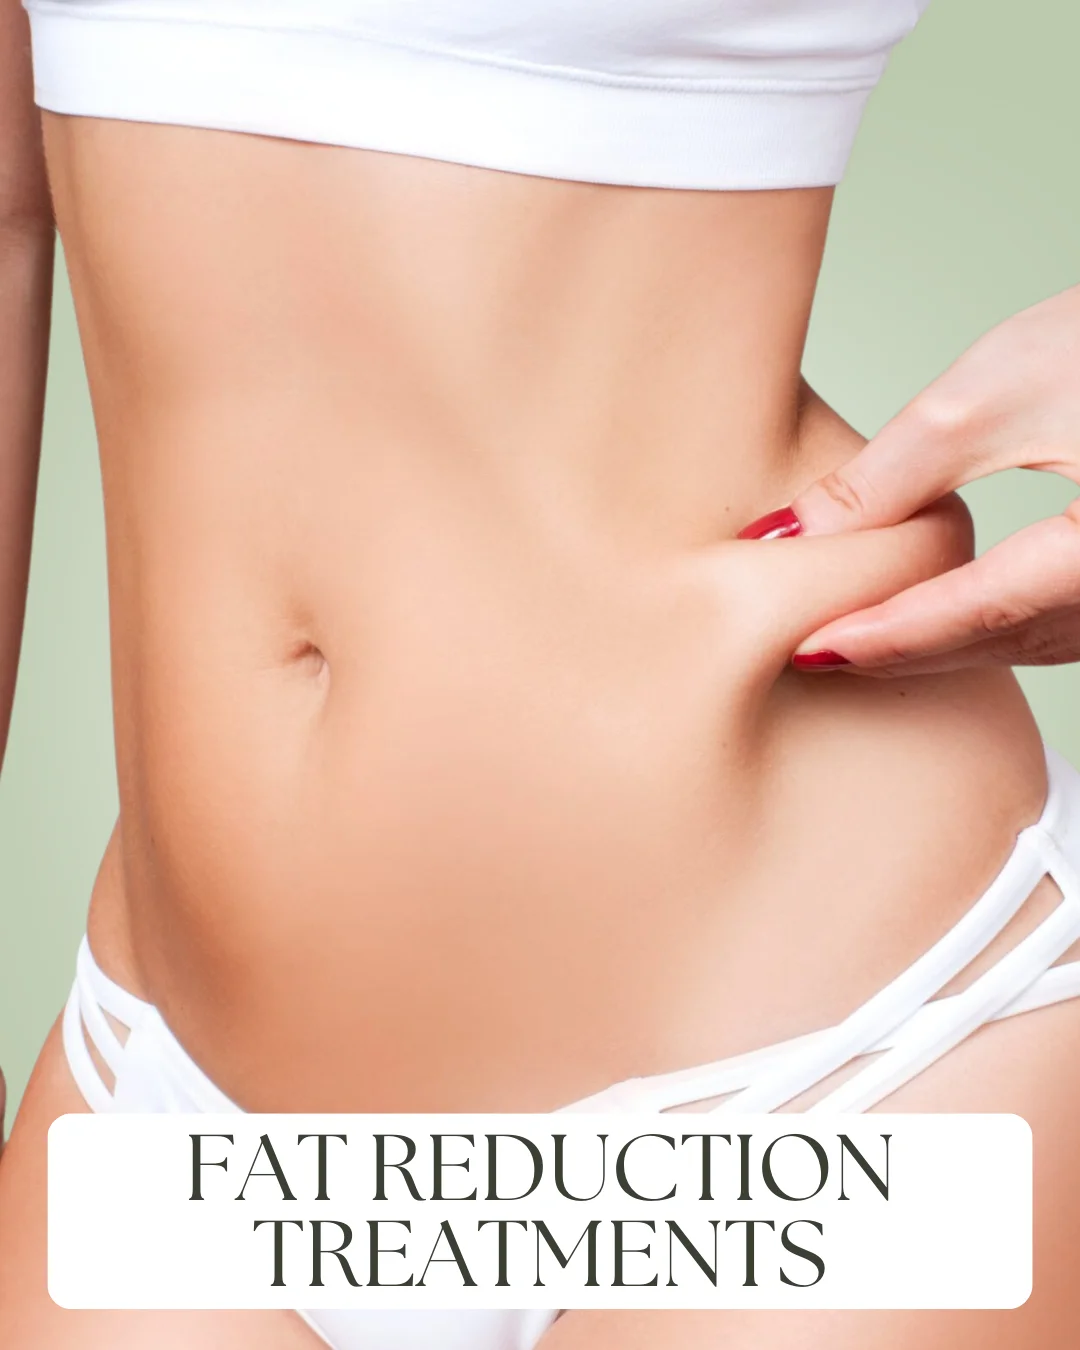 12. FAT REDUCTION